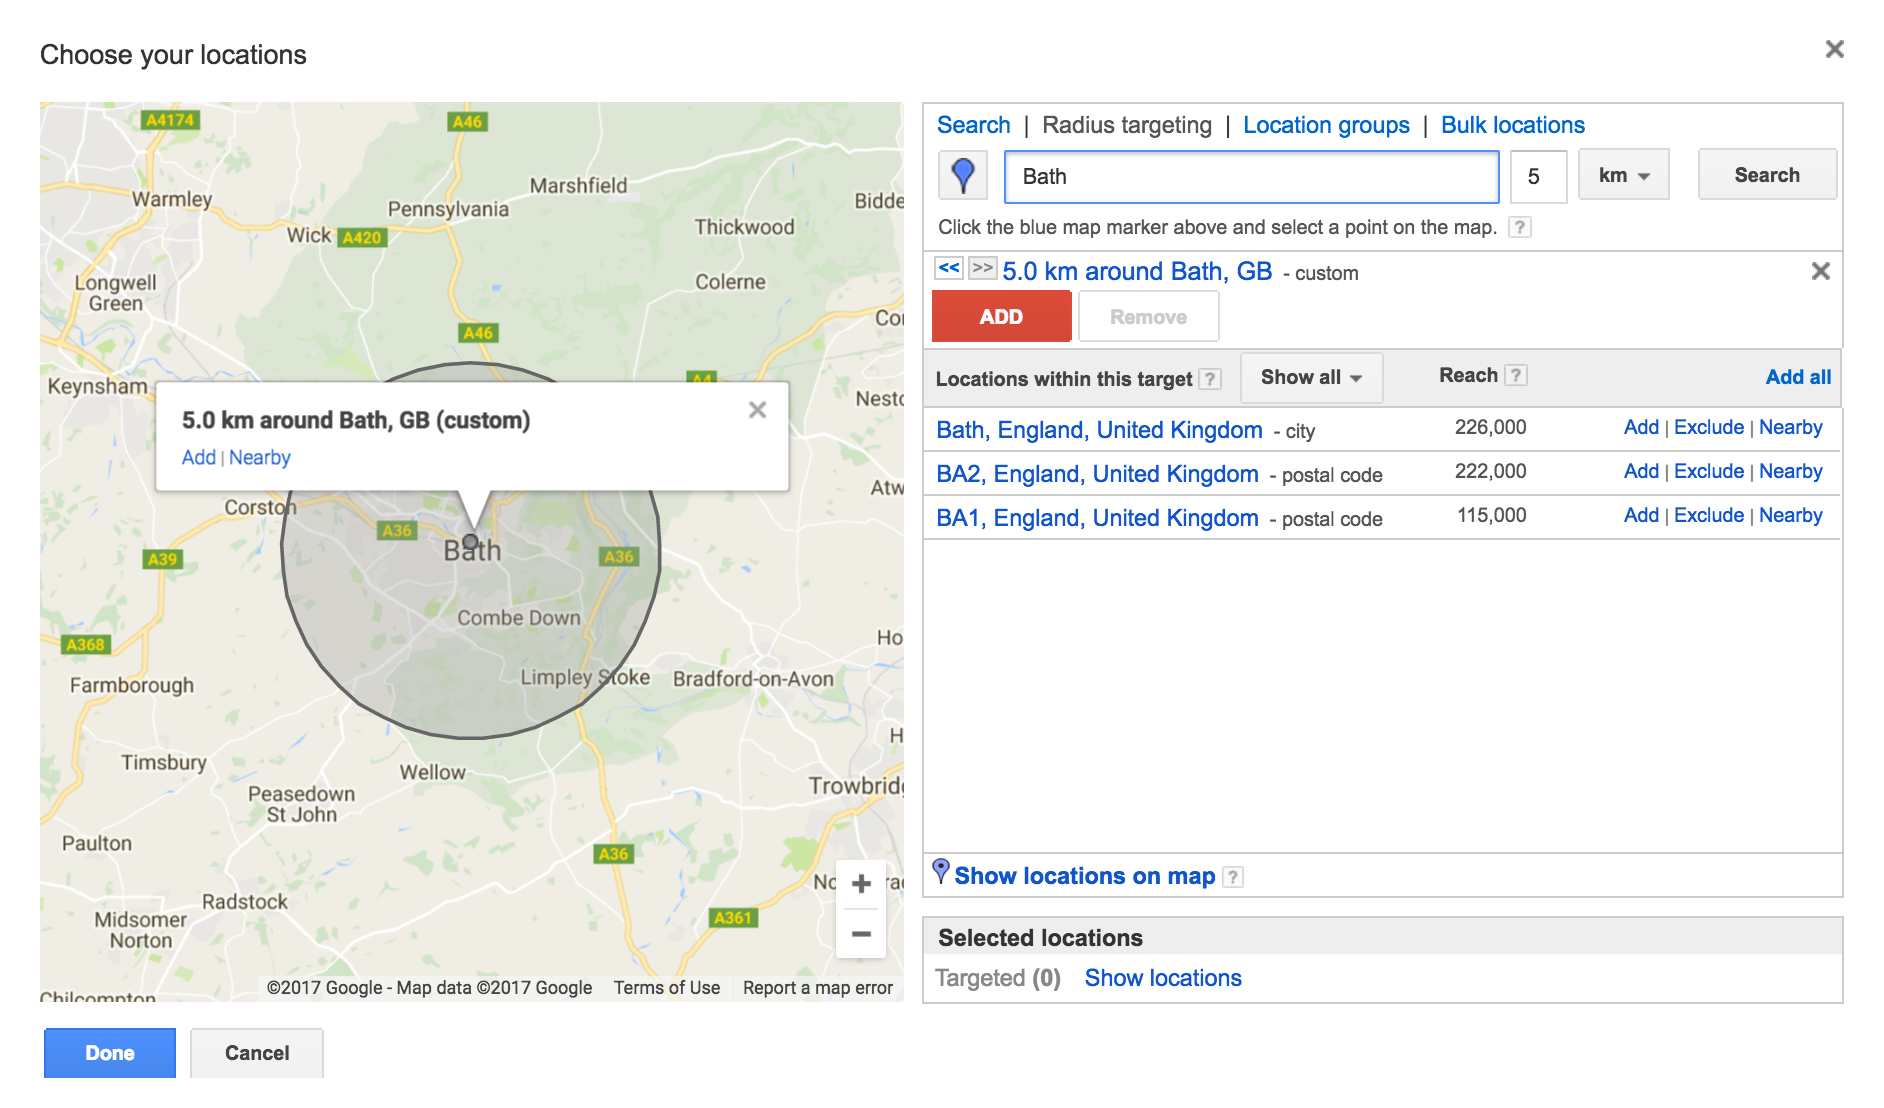 Screenshot of adwords call only campaign set up